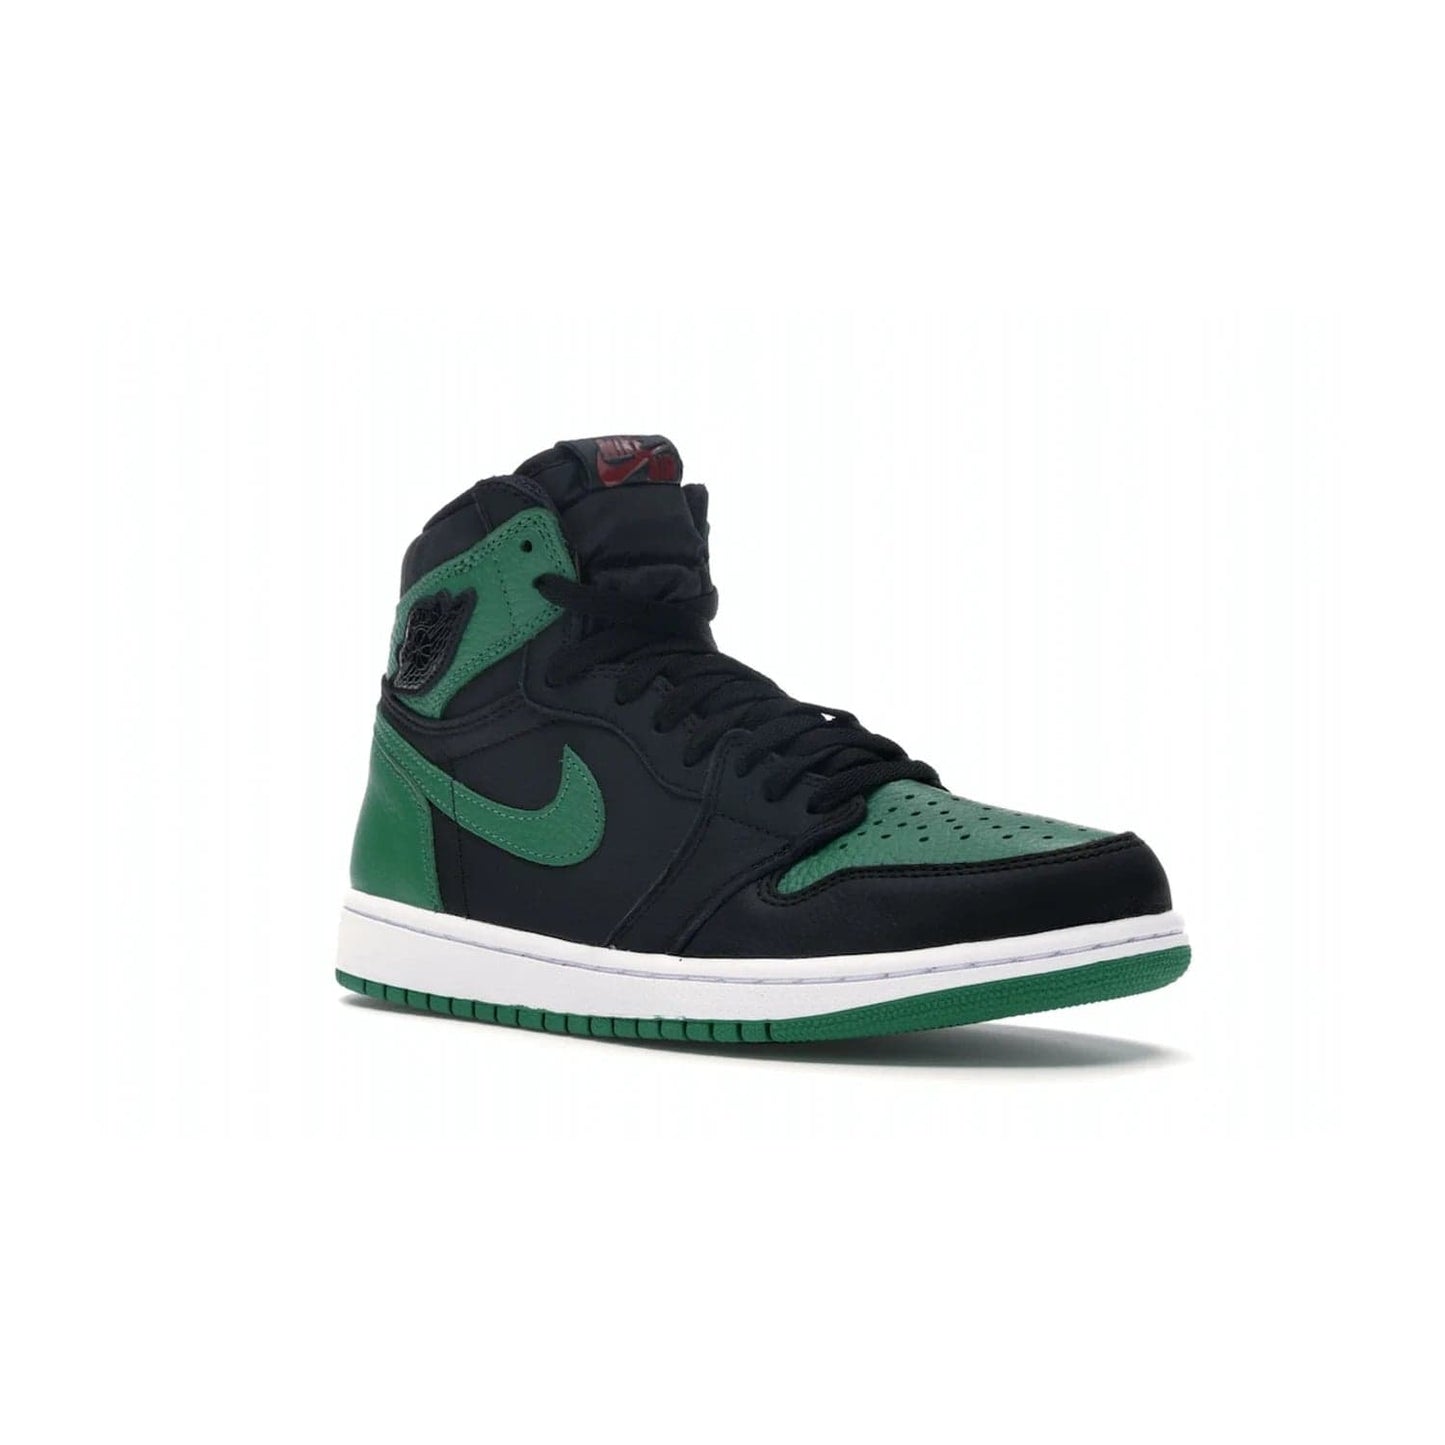 Jordan 1 Retro High Pine Green Black - Image 5 - Only at www.BallersClubKickz.com - Step into fresh style with the Jordan 1 Retro High Pine Green Black. Combining a black tumbled leather upper with green leather overlays, this sneaker features a Gym Red embroidered tongue tag, sail midsole, and pine green outsole for iconic style with a unique twist.